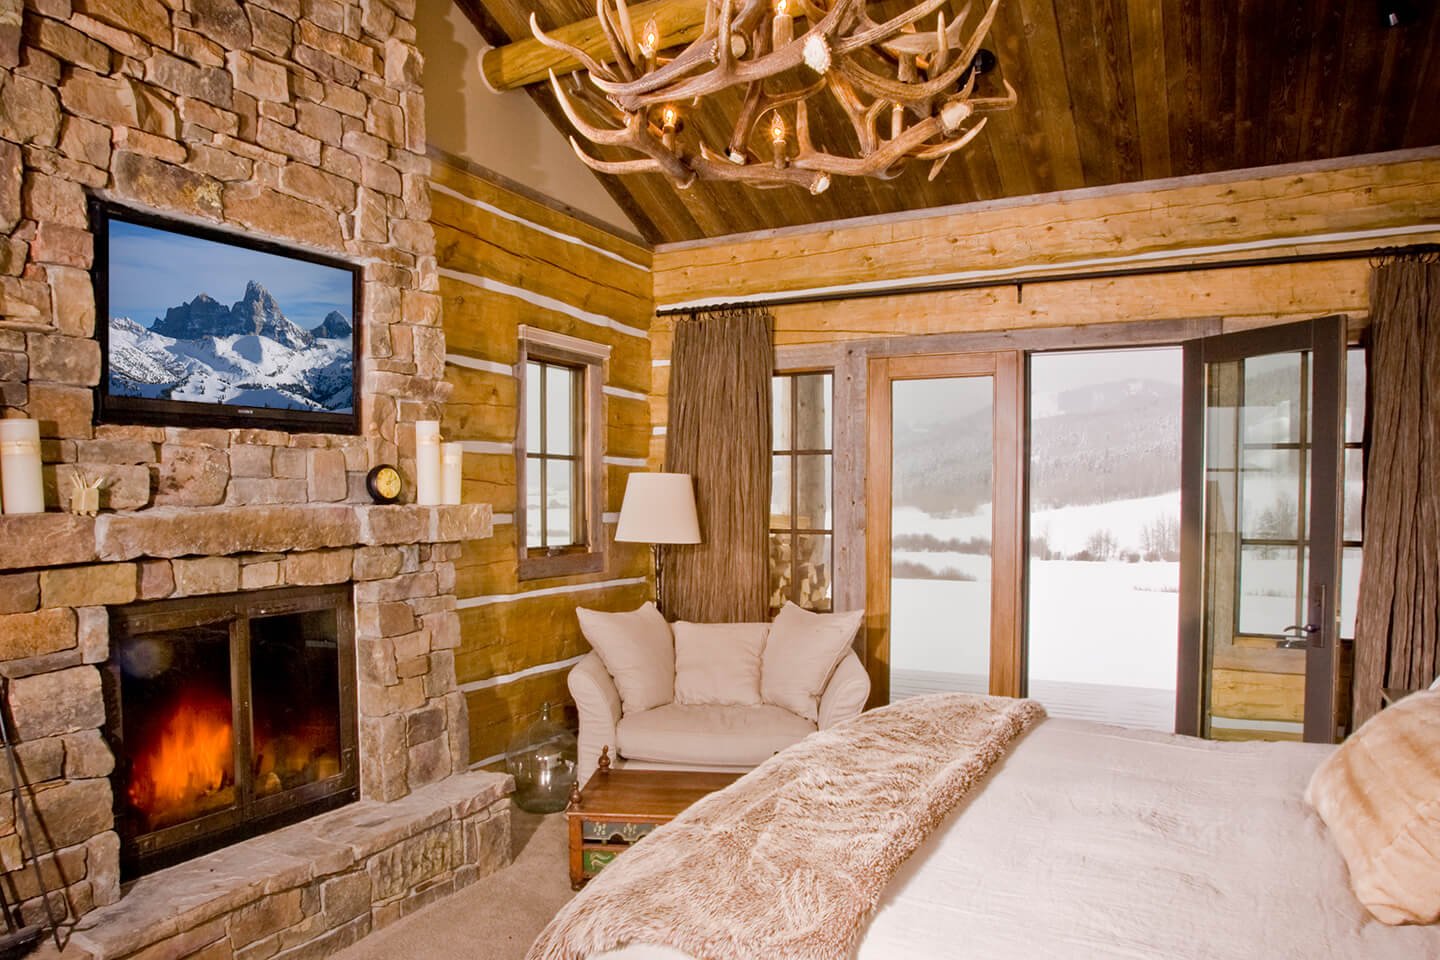 Master bedroom with fireplace and antler chandelier